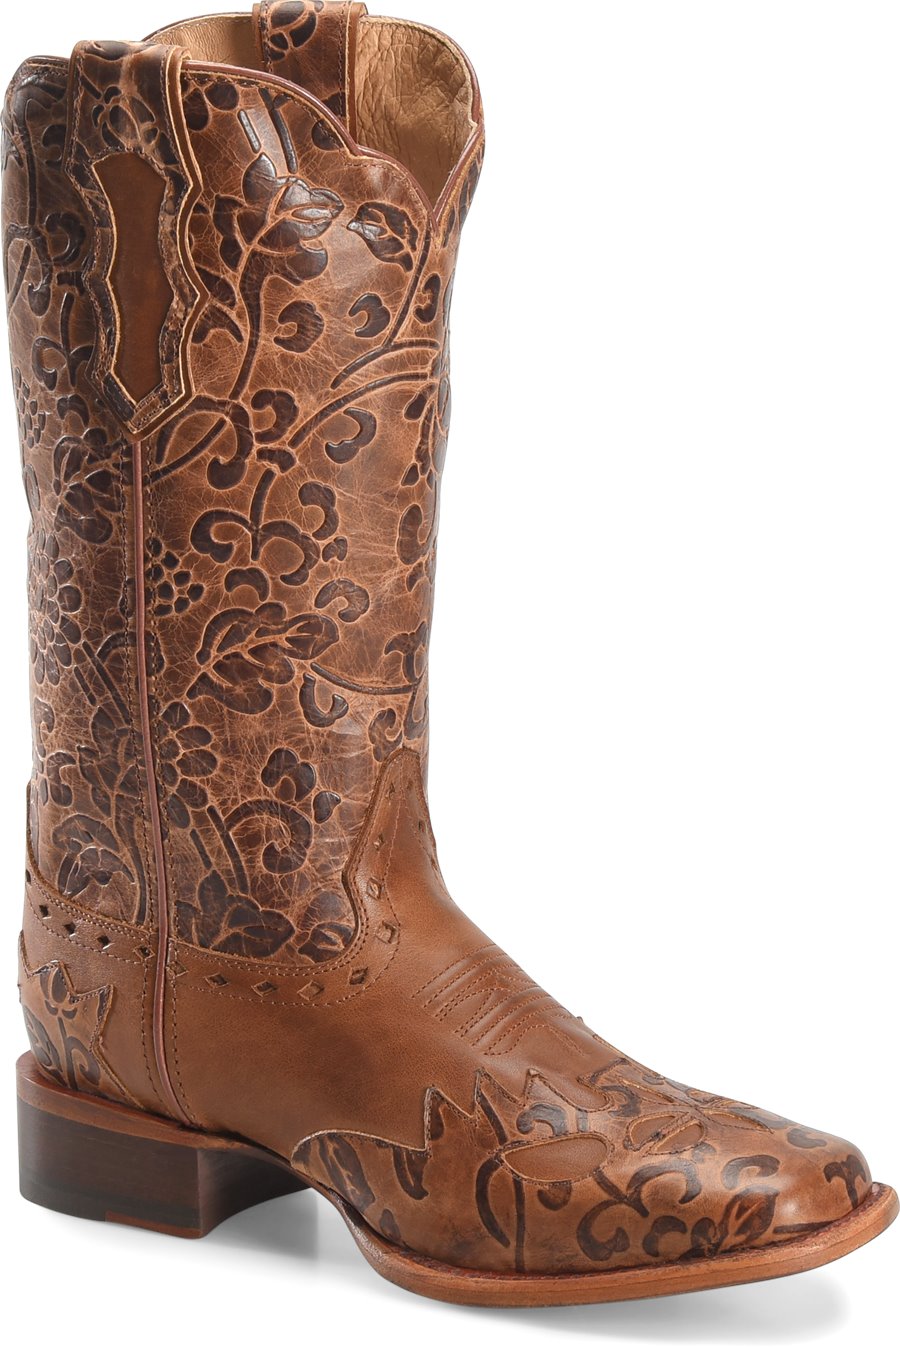 Sonora Shoes - Sonora Jana Women's Shoes in Rust Tooled color. - #sonorashoes #rustshoes